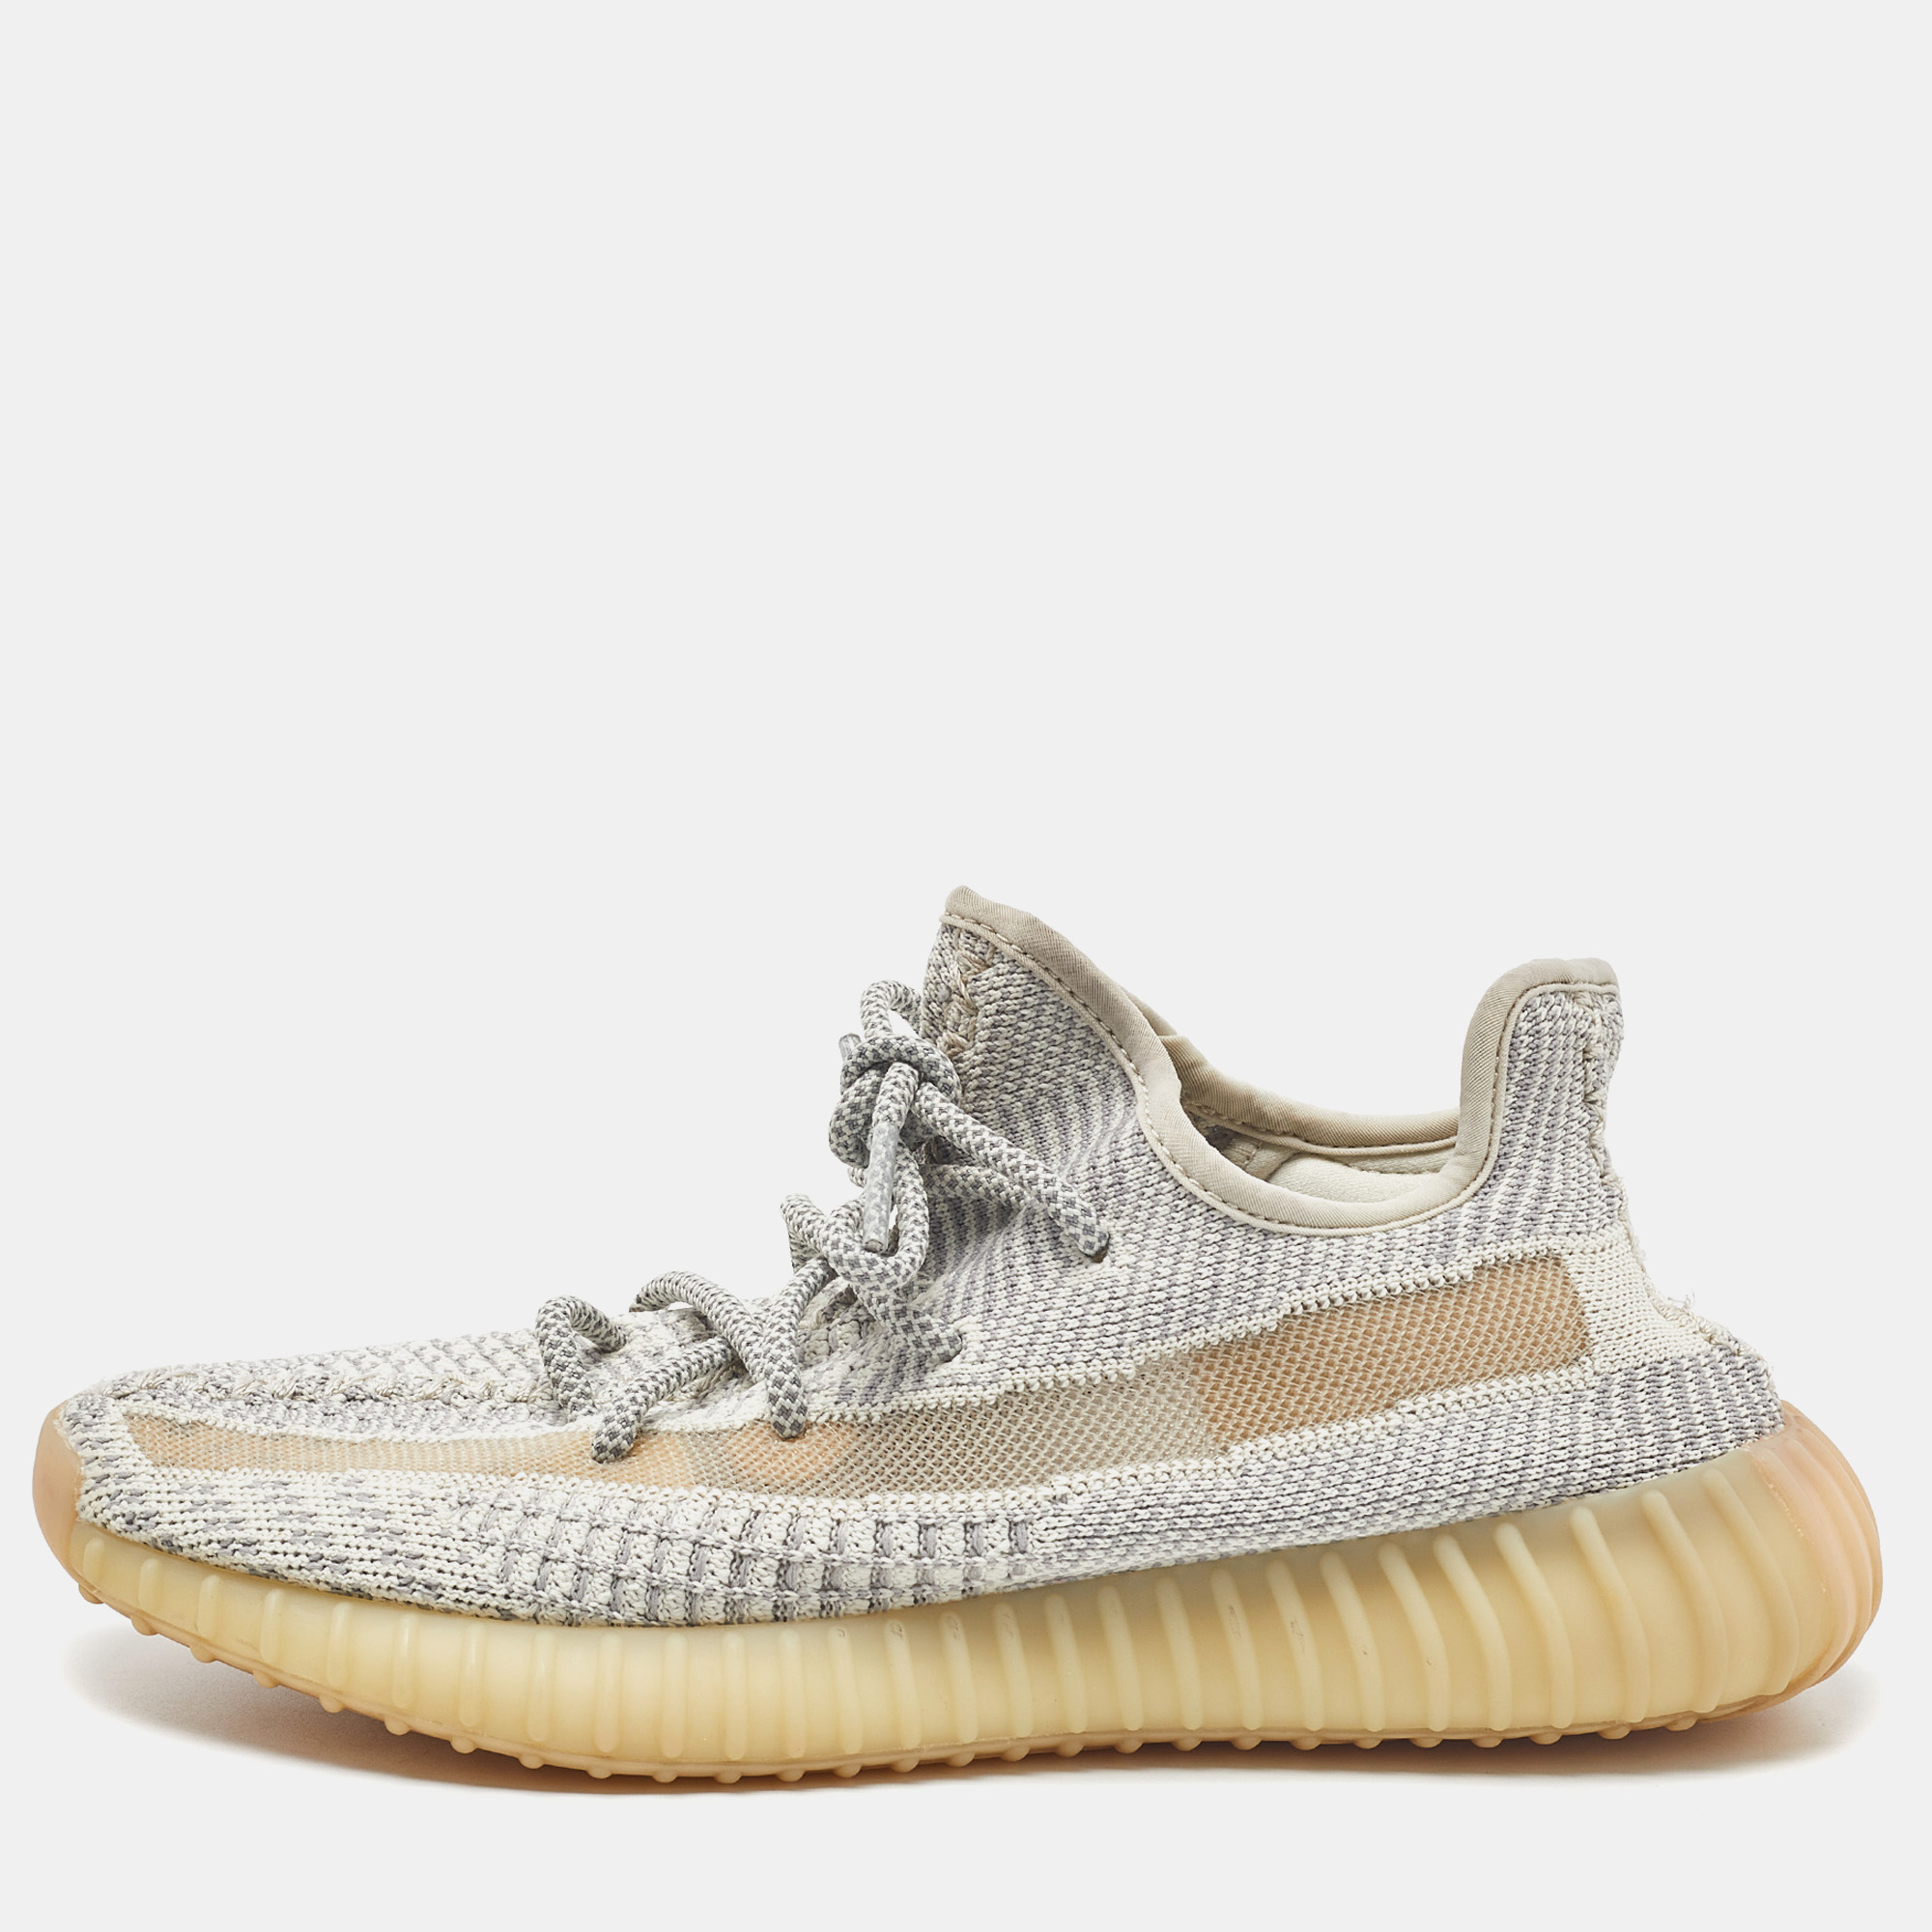 Yeezy X Adidas Boost 350 V2 Lundmark Non-Reflective Sneakers Size 39 1/3